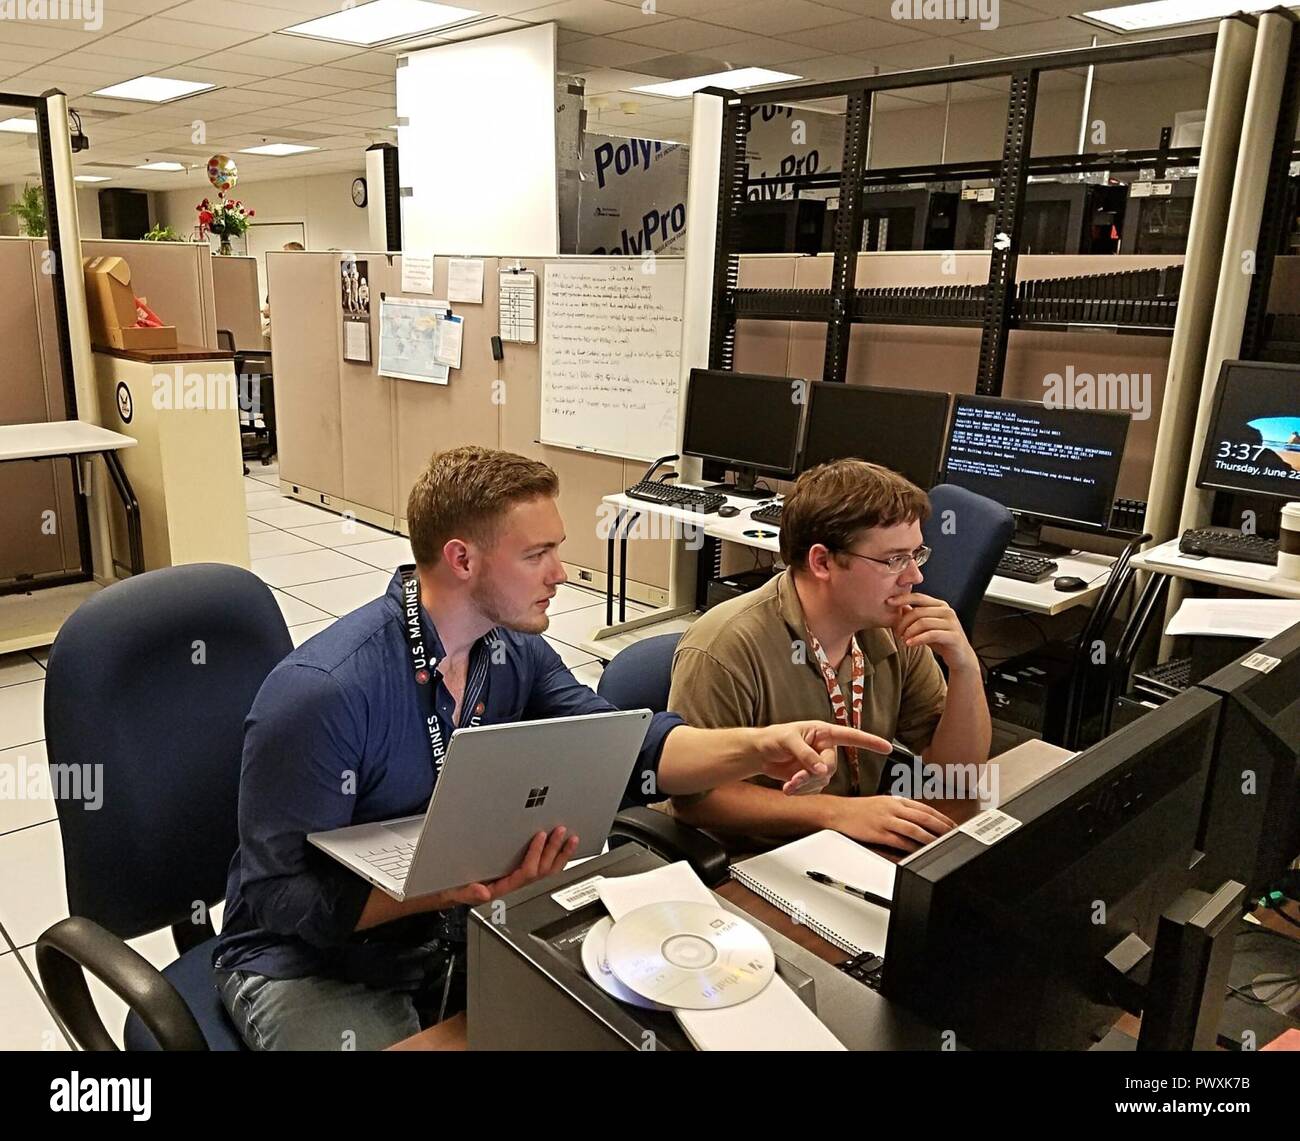 Joe Scanlan, a premier field engineer with Microsoft, and Mike Foldes, an information technology support specialist with Navy Personnel Command, troubleshoot simultaneous application deployment in Memphis, Tennessee, June 22, 2017. Scanlan, a former U.S. Marine Corps sergeant and combat correspondent, visits commercial companies and military bases across the U.S. to teach their IT staff about a systems management product that can upgrade thousands of machines simultaneously, provide active reporting on security patching across all machines, deploy software updates and install applications on a Stock Photo